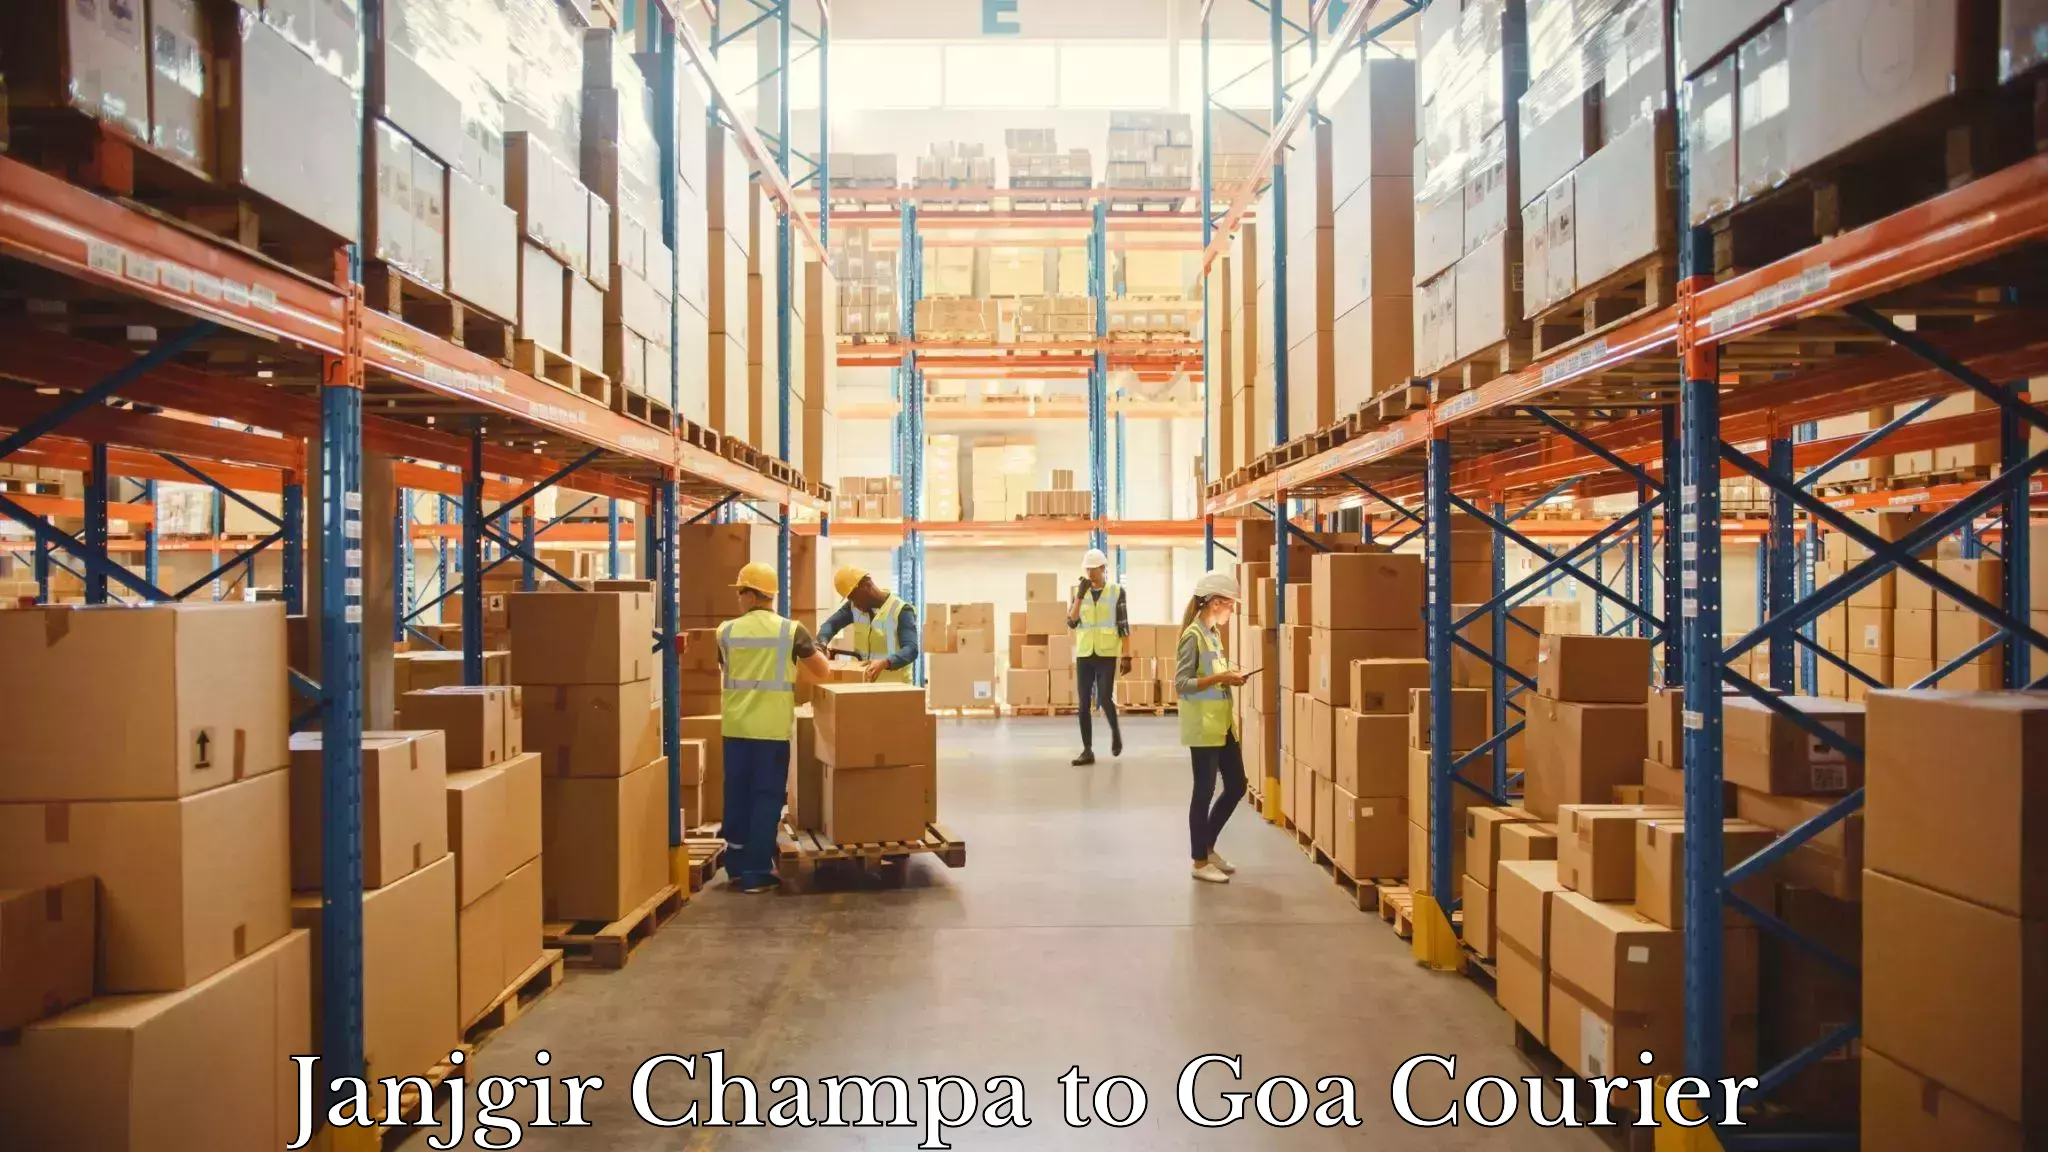 Fast delivery service Janjgir Champa to Goa